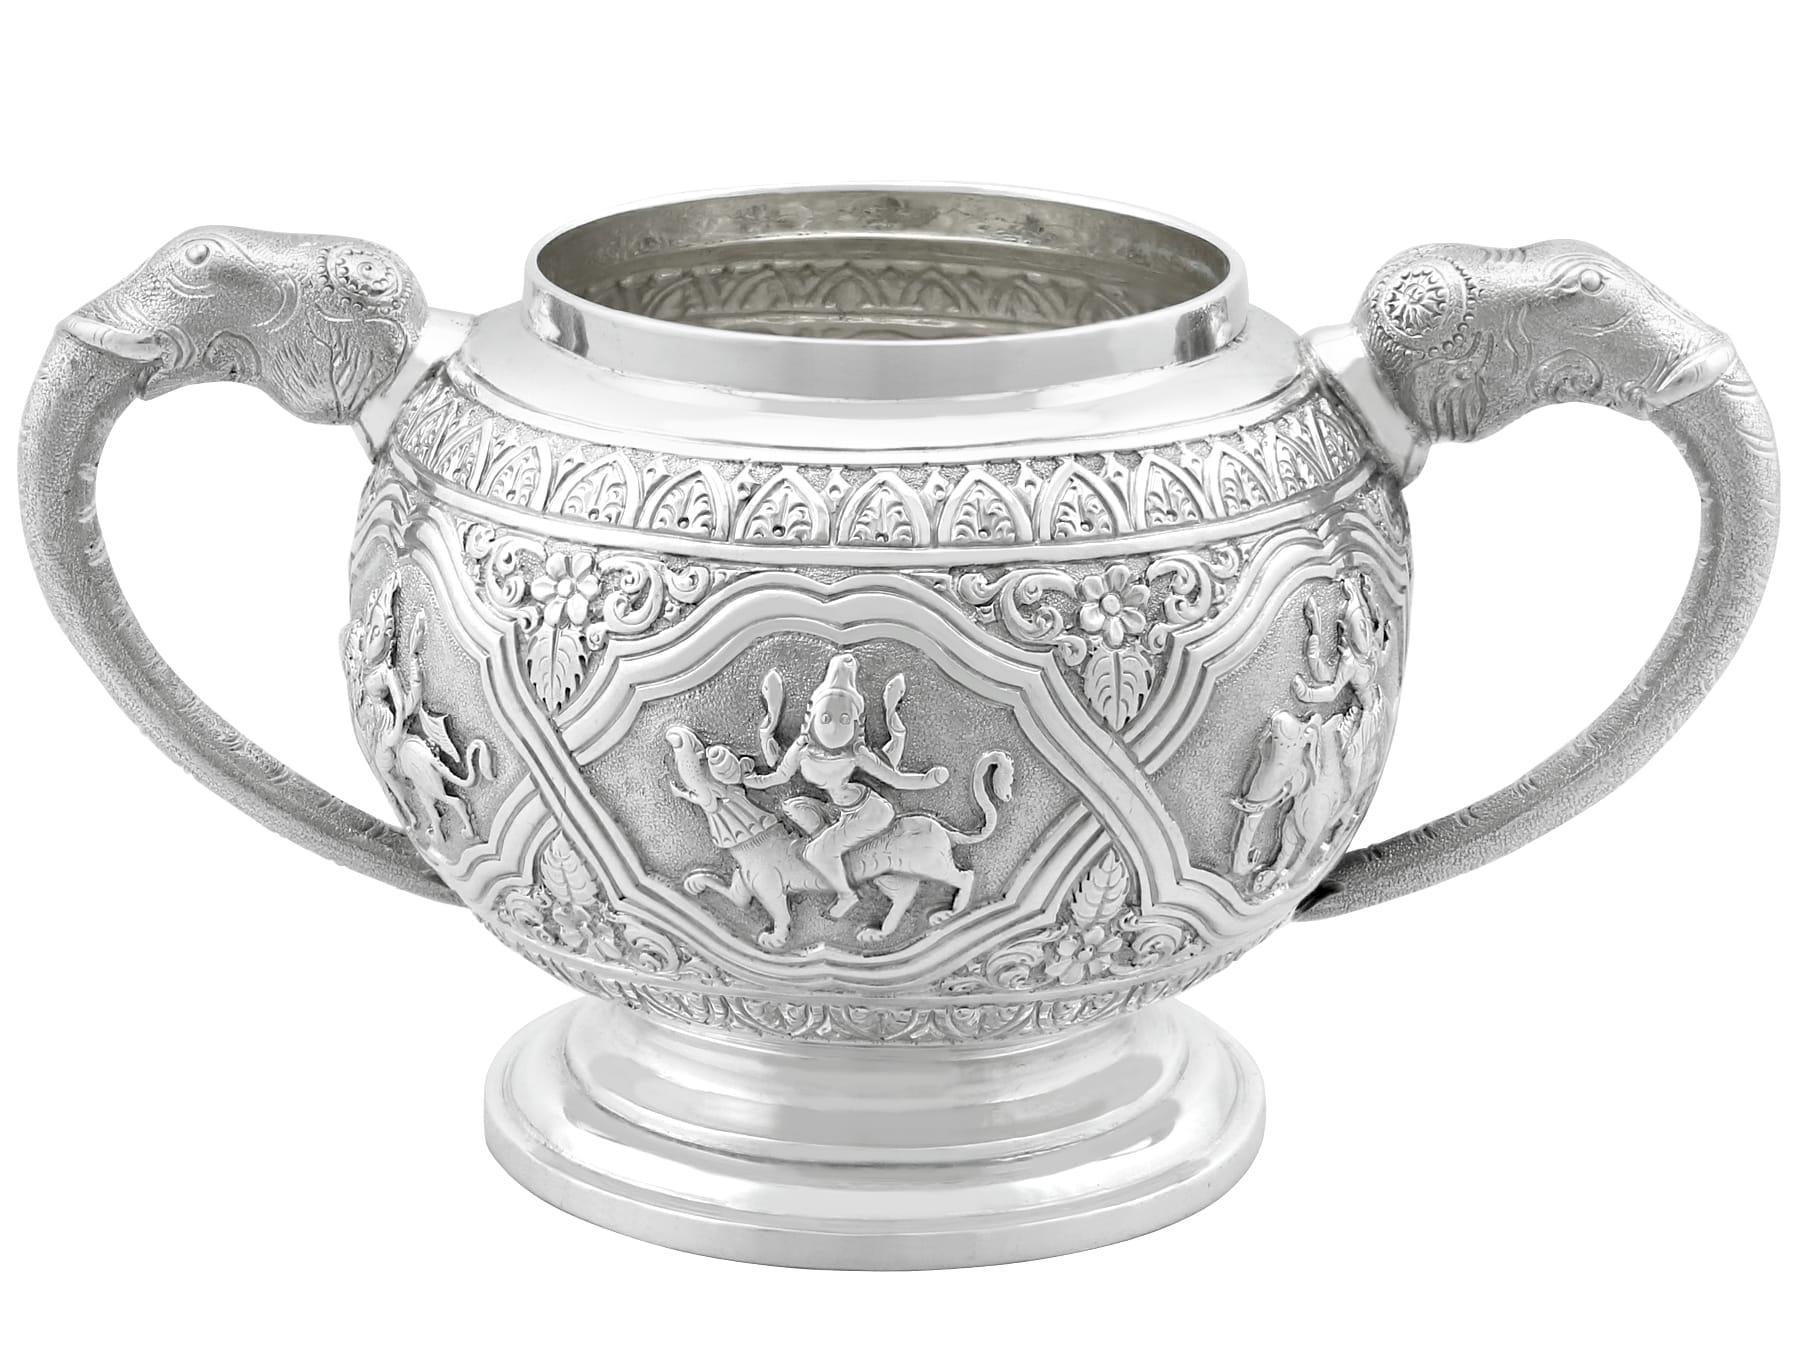 Antique Indian Silver Sugar Bowl, Circa 1900 In Excellent Condition For Sale In Jesmond, Newcastle Upon Tyne